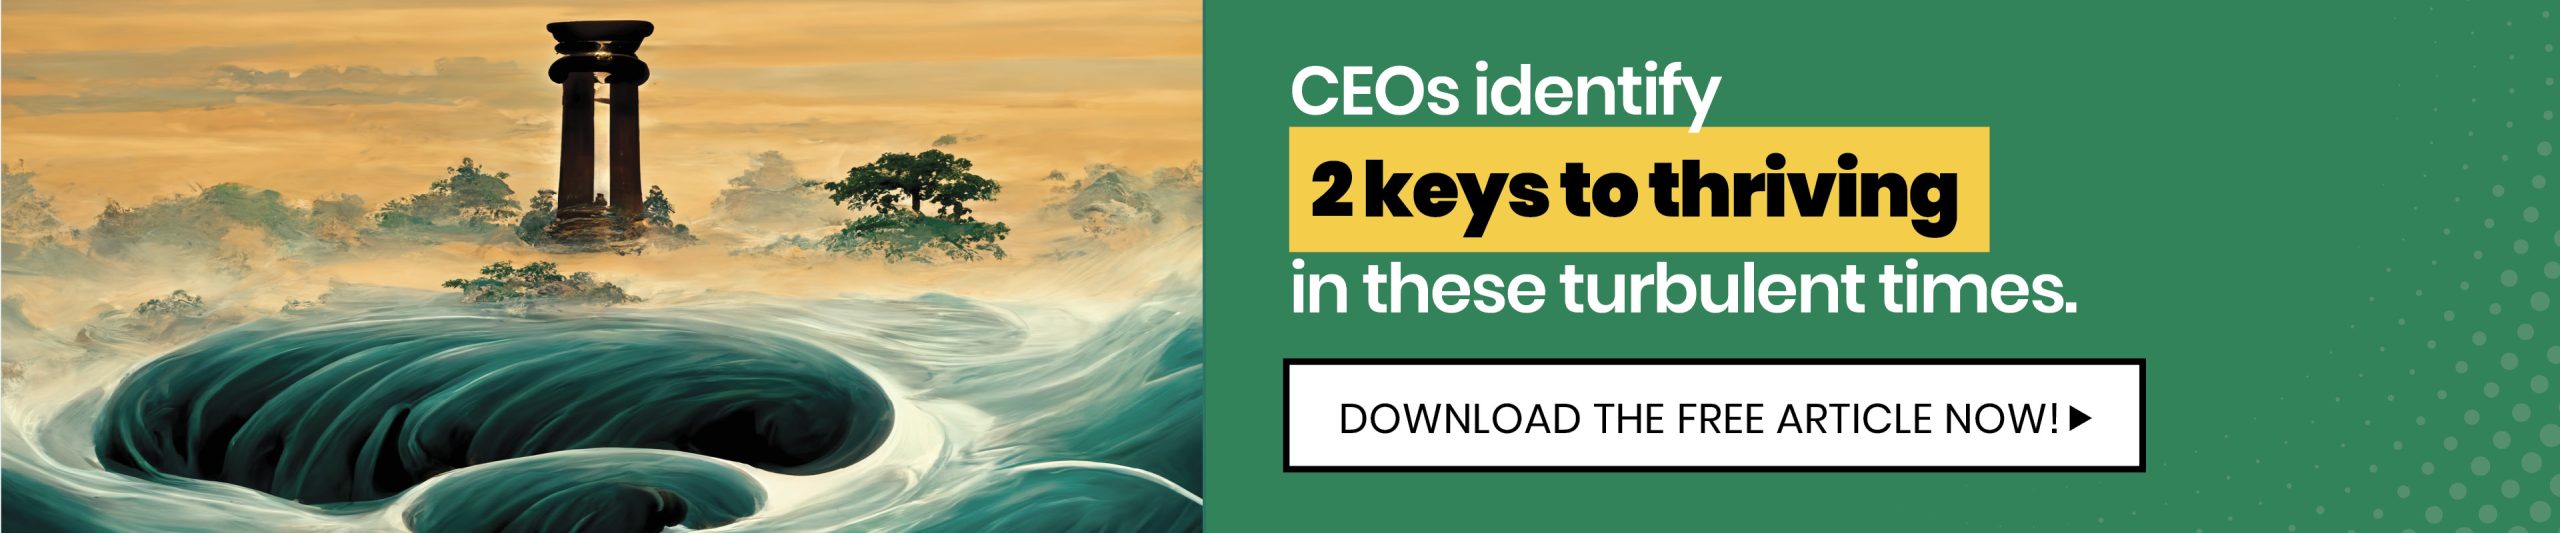 CEOs identify 2 keys to thriving in these turbulent times